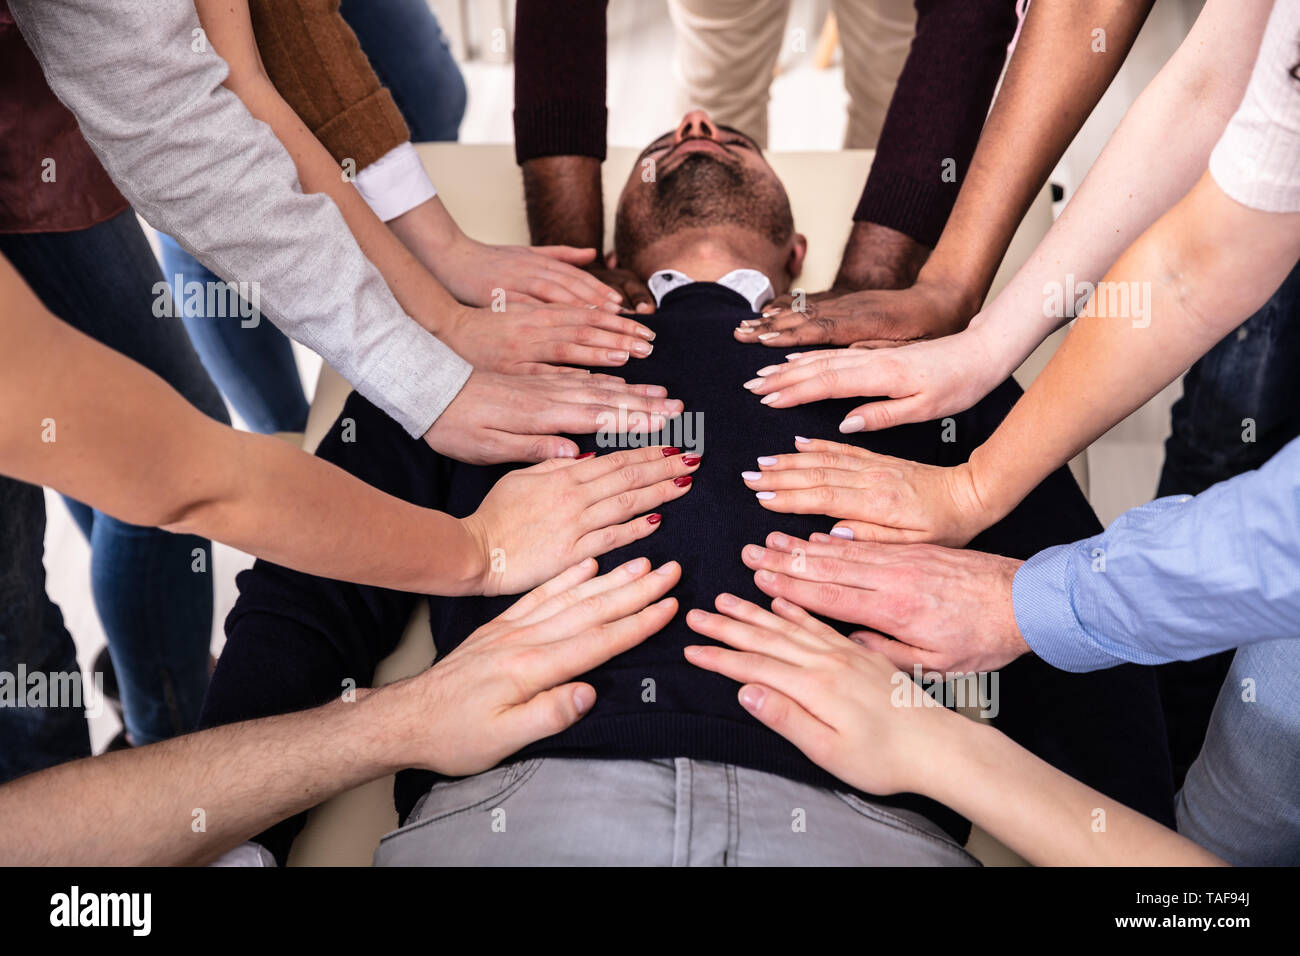 Group Of Hands Touching Man's Body Lying On Table During Reiki Session Stock Photo